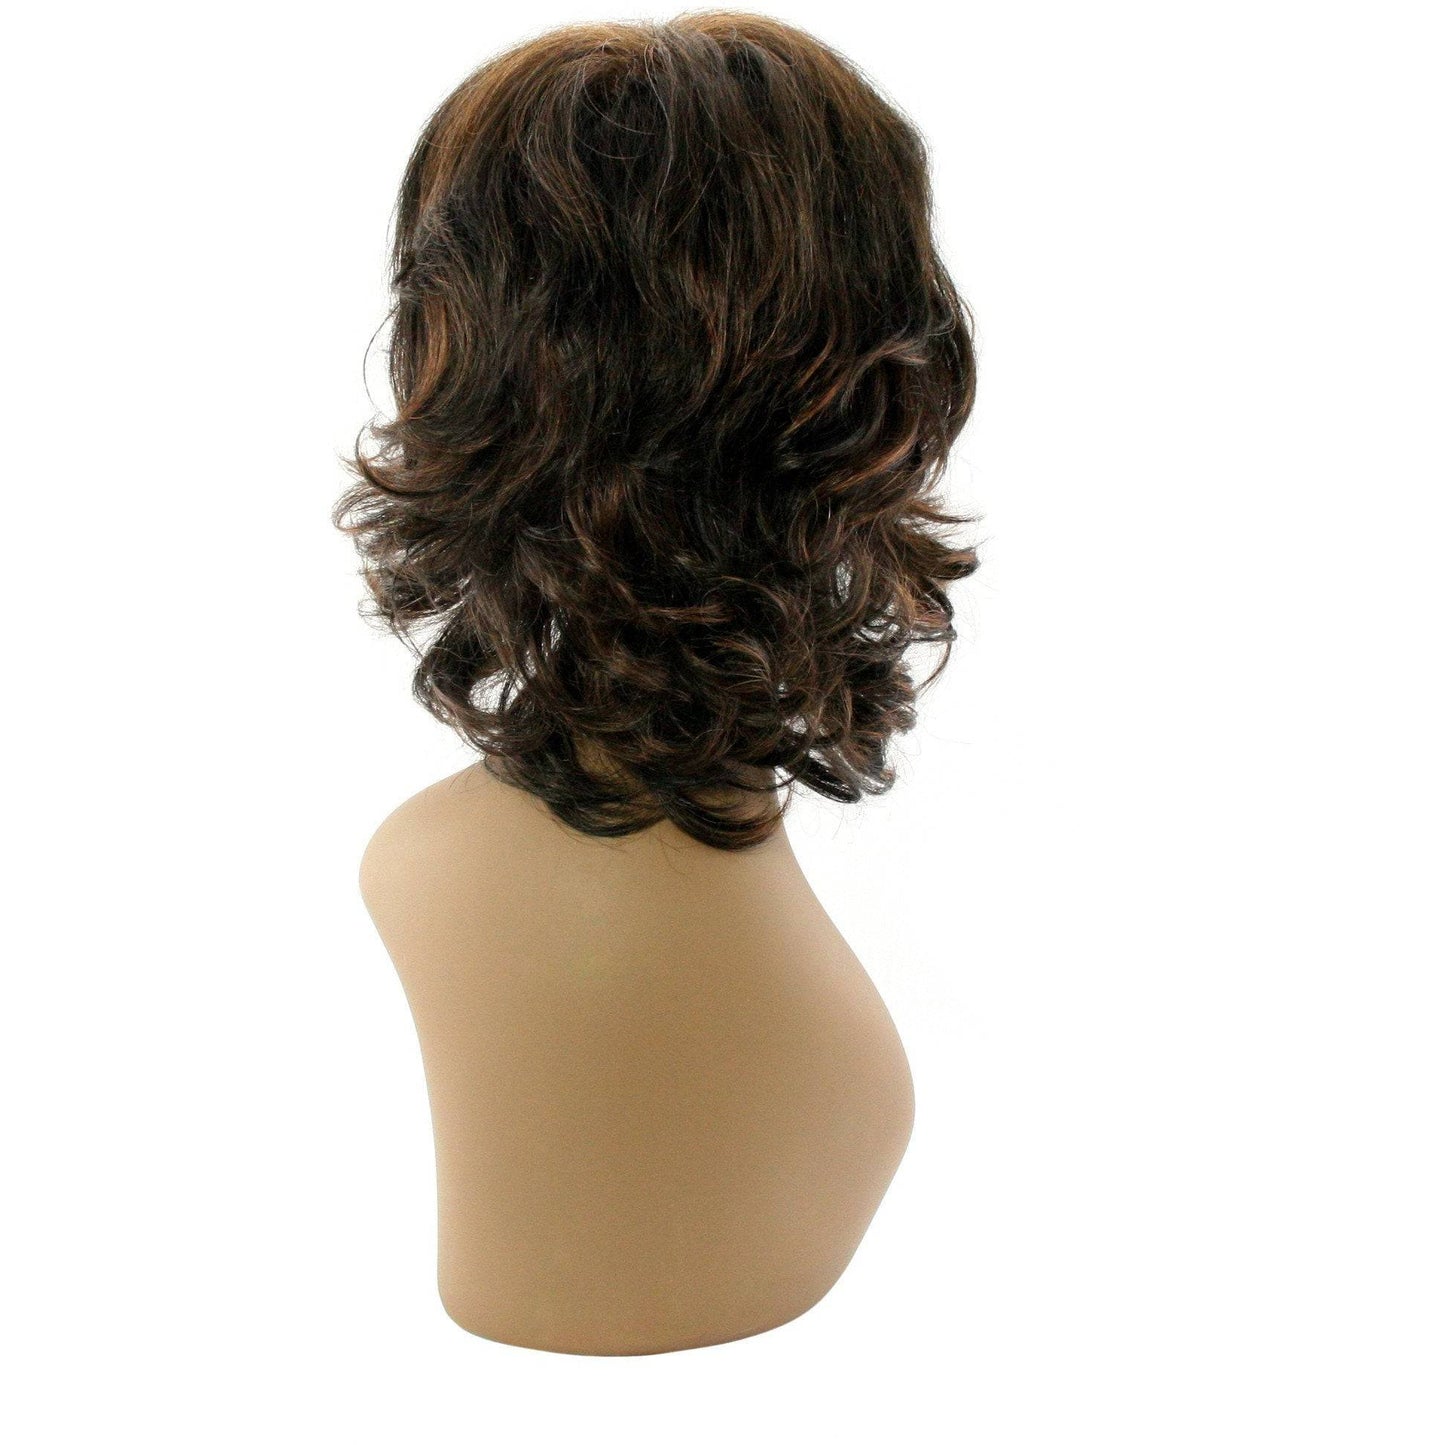 Unique's 100% Human Hair Full Wig / Style "U" - VIP Extensions